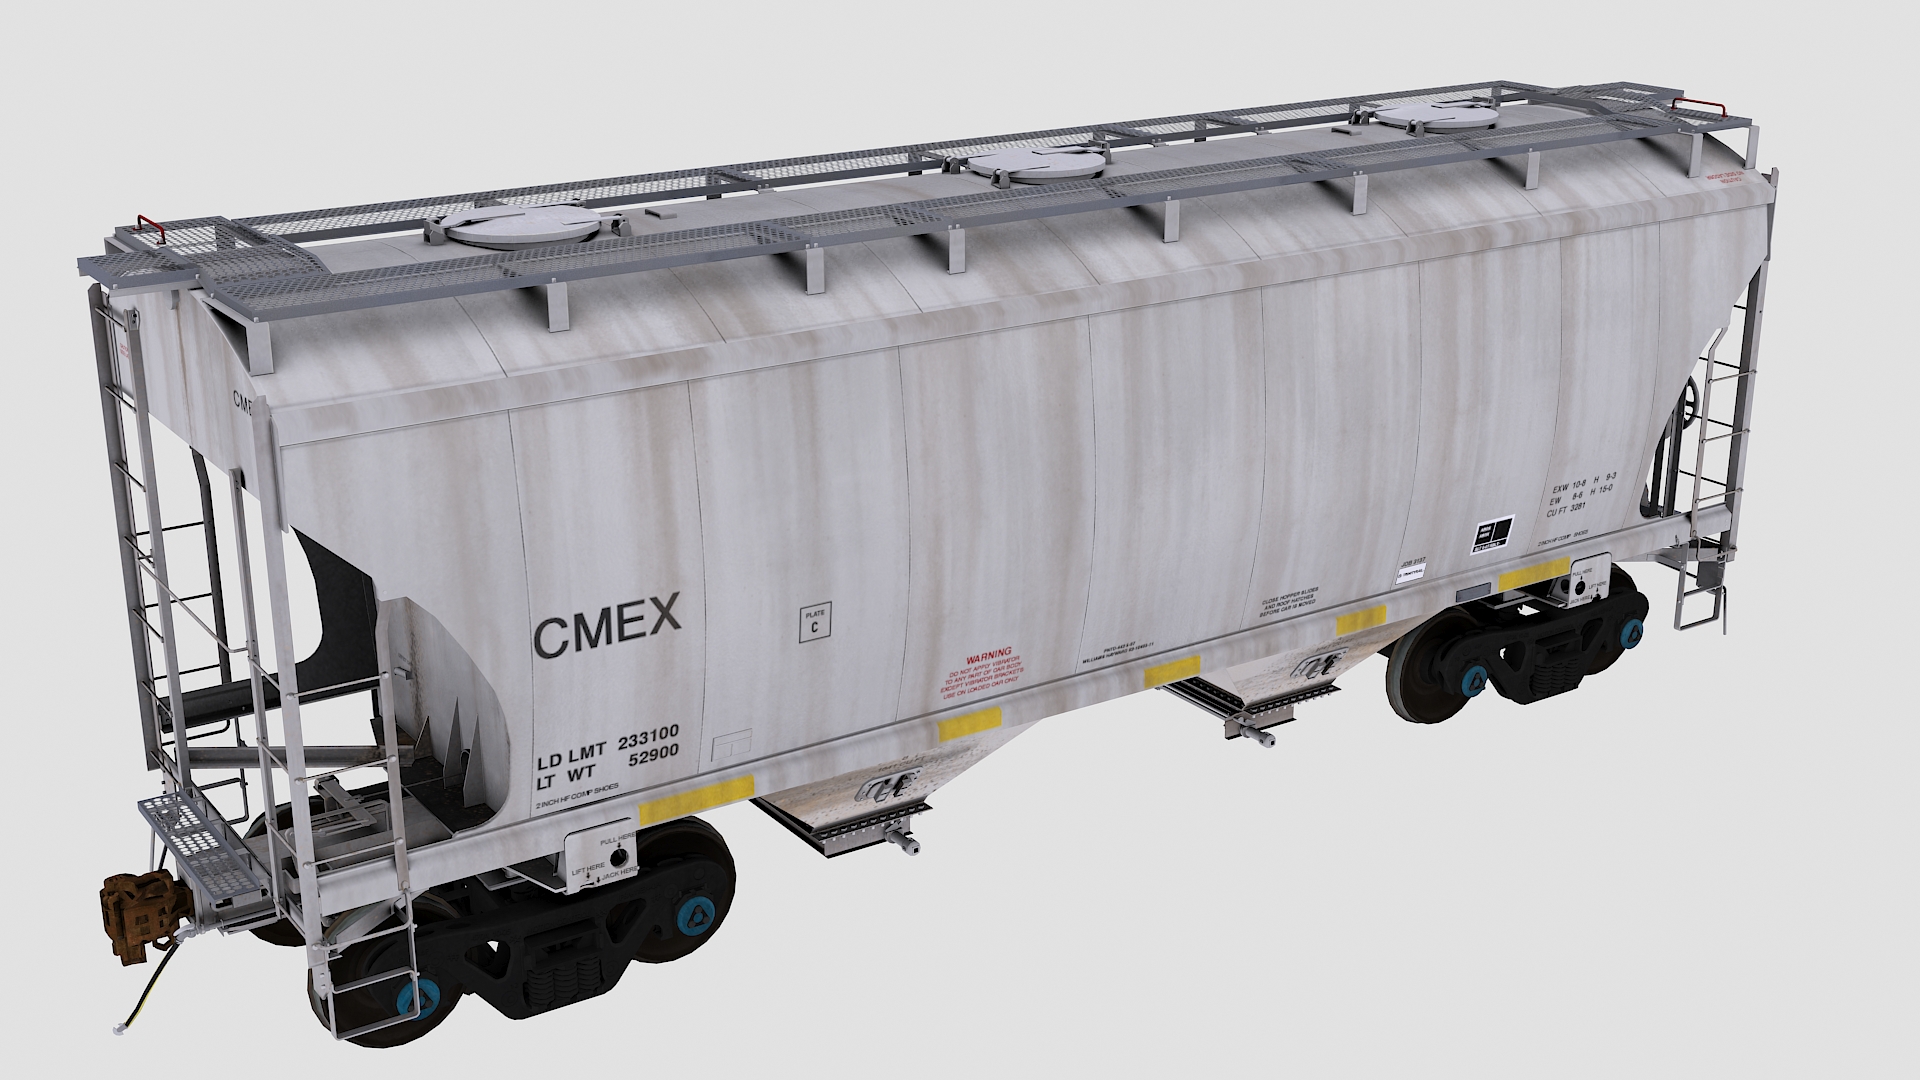 Cmex is two bay covered hopper